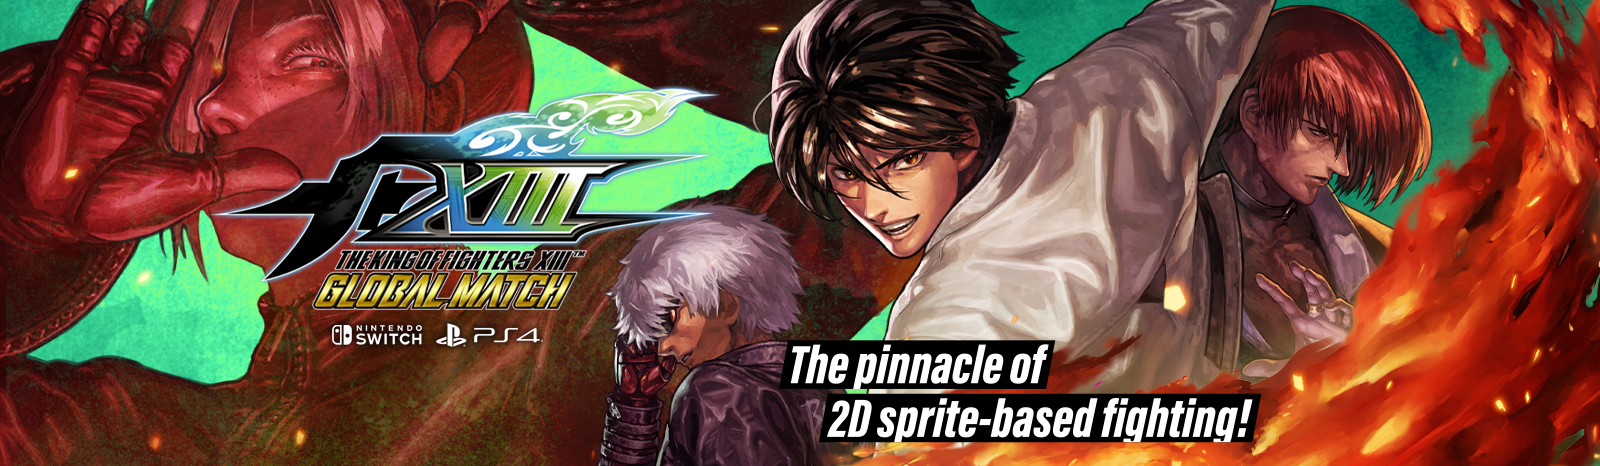 King Of Fighters XIII Global Match' Is Now Out On Switch And It's